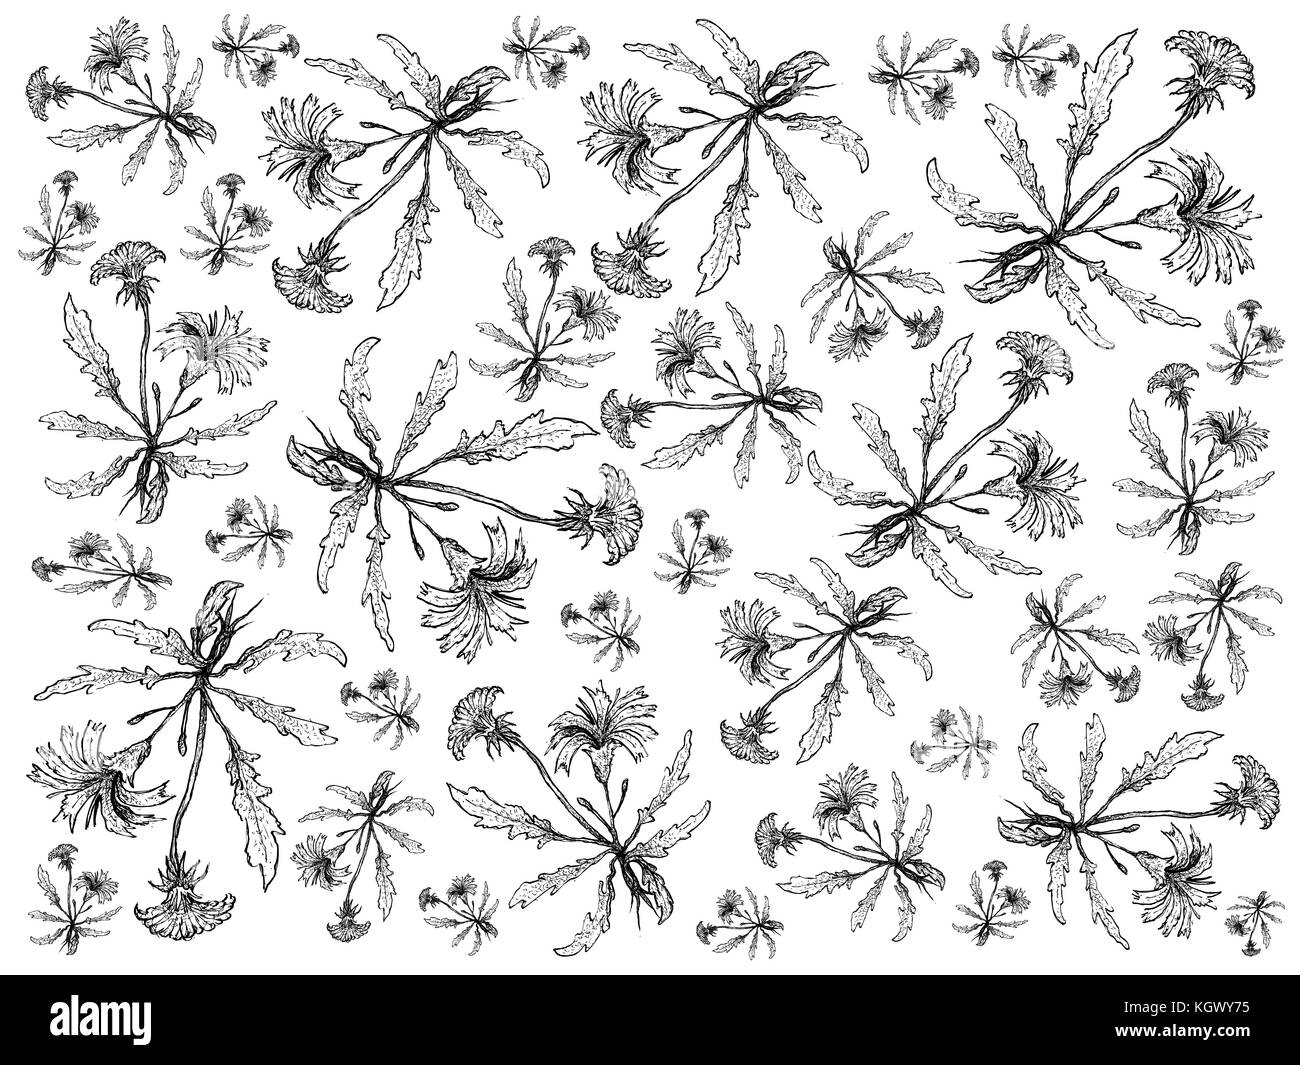 Vegetable Salad, Illustration Background Pattern of Hand Drawn Sketch Delicious Fresh Green Catsear Isolated on White Background. Stock Photo